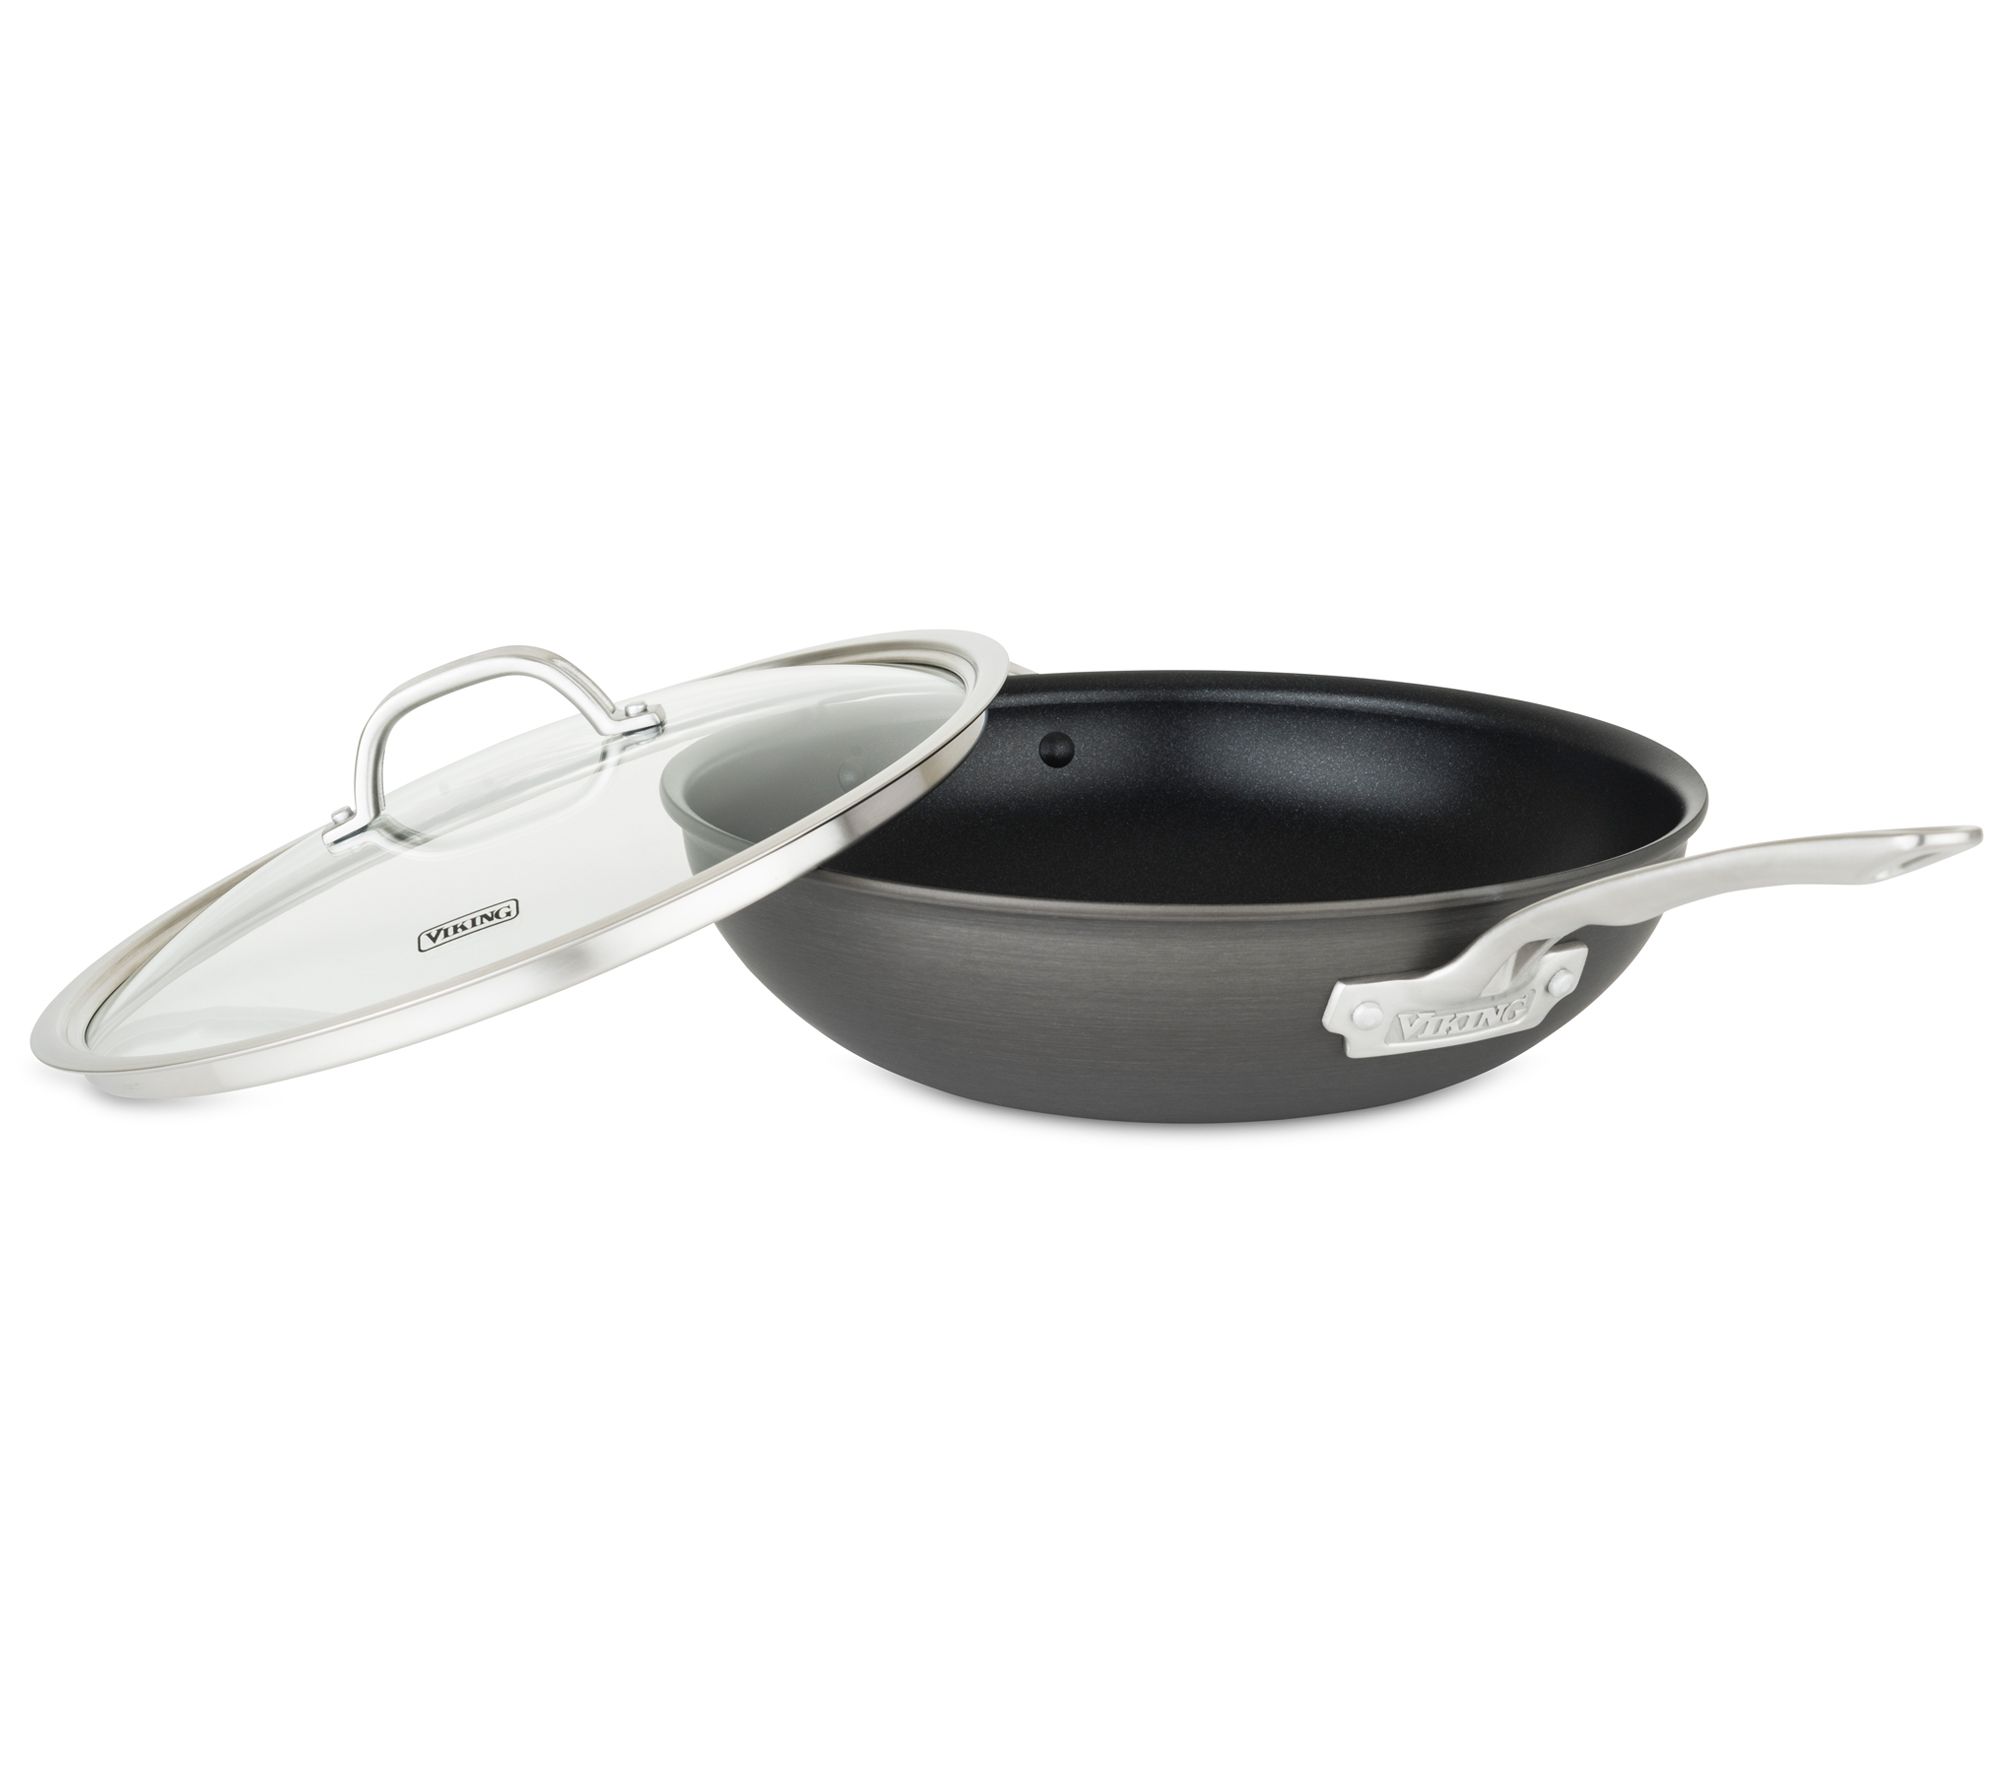 All-Clad 12 Inch Non-Stick Fry Pan